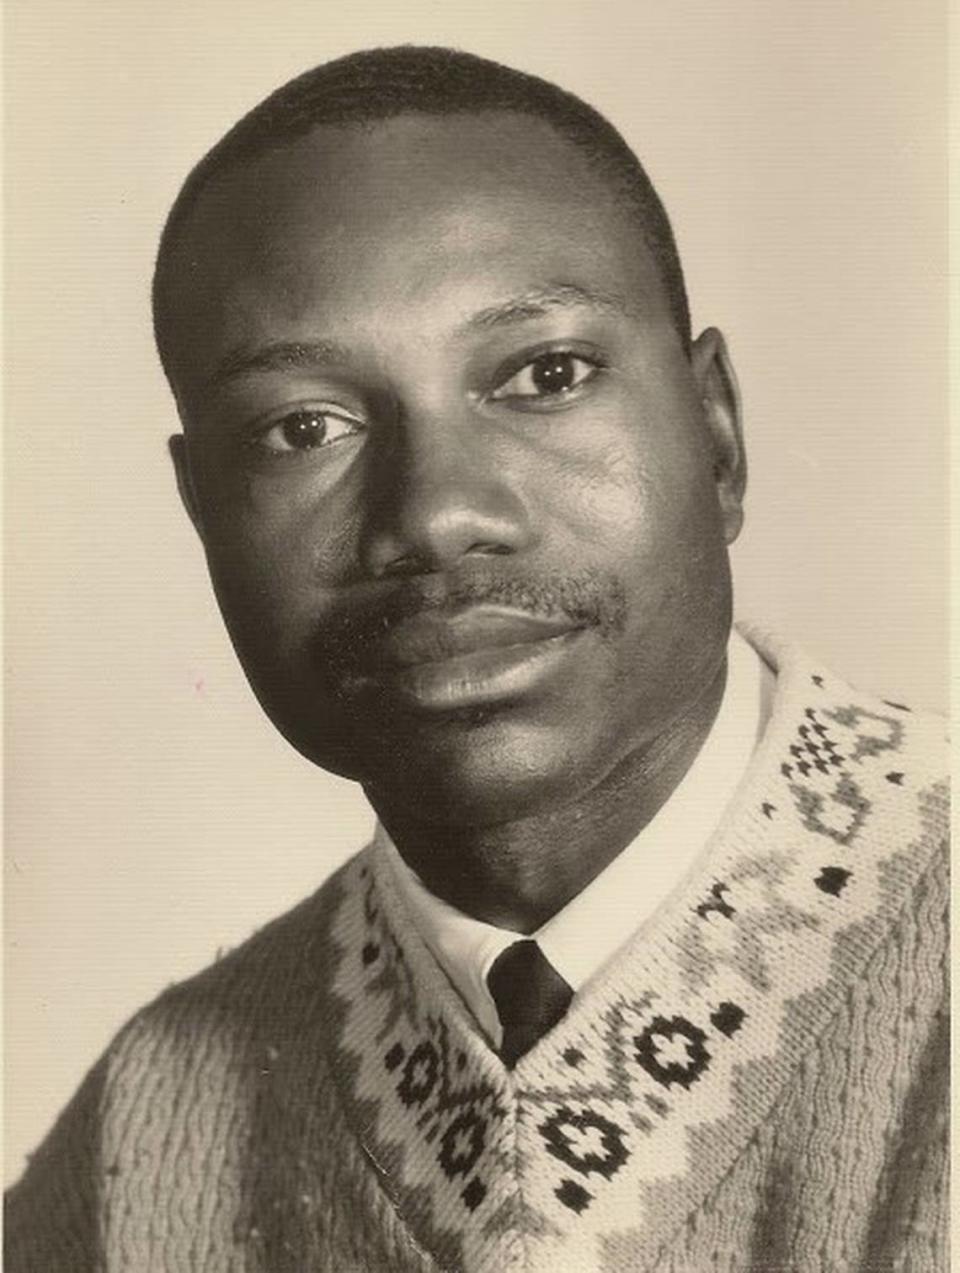 Billy Knight was the first in his large family to attend college, graduating from what was then the all-Black Mississippi Valley Vocational College. Now 83, Knight was elected Moss Point mayor in 2021.